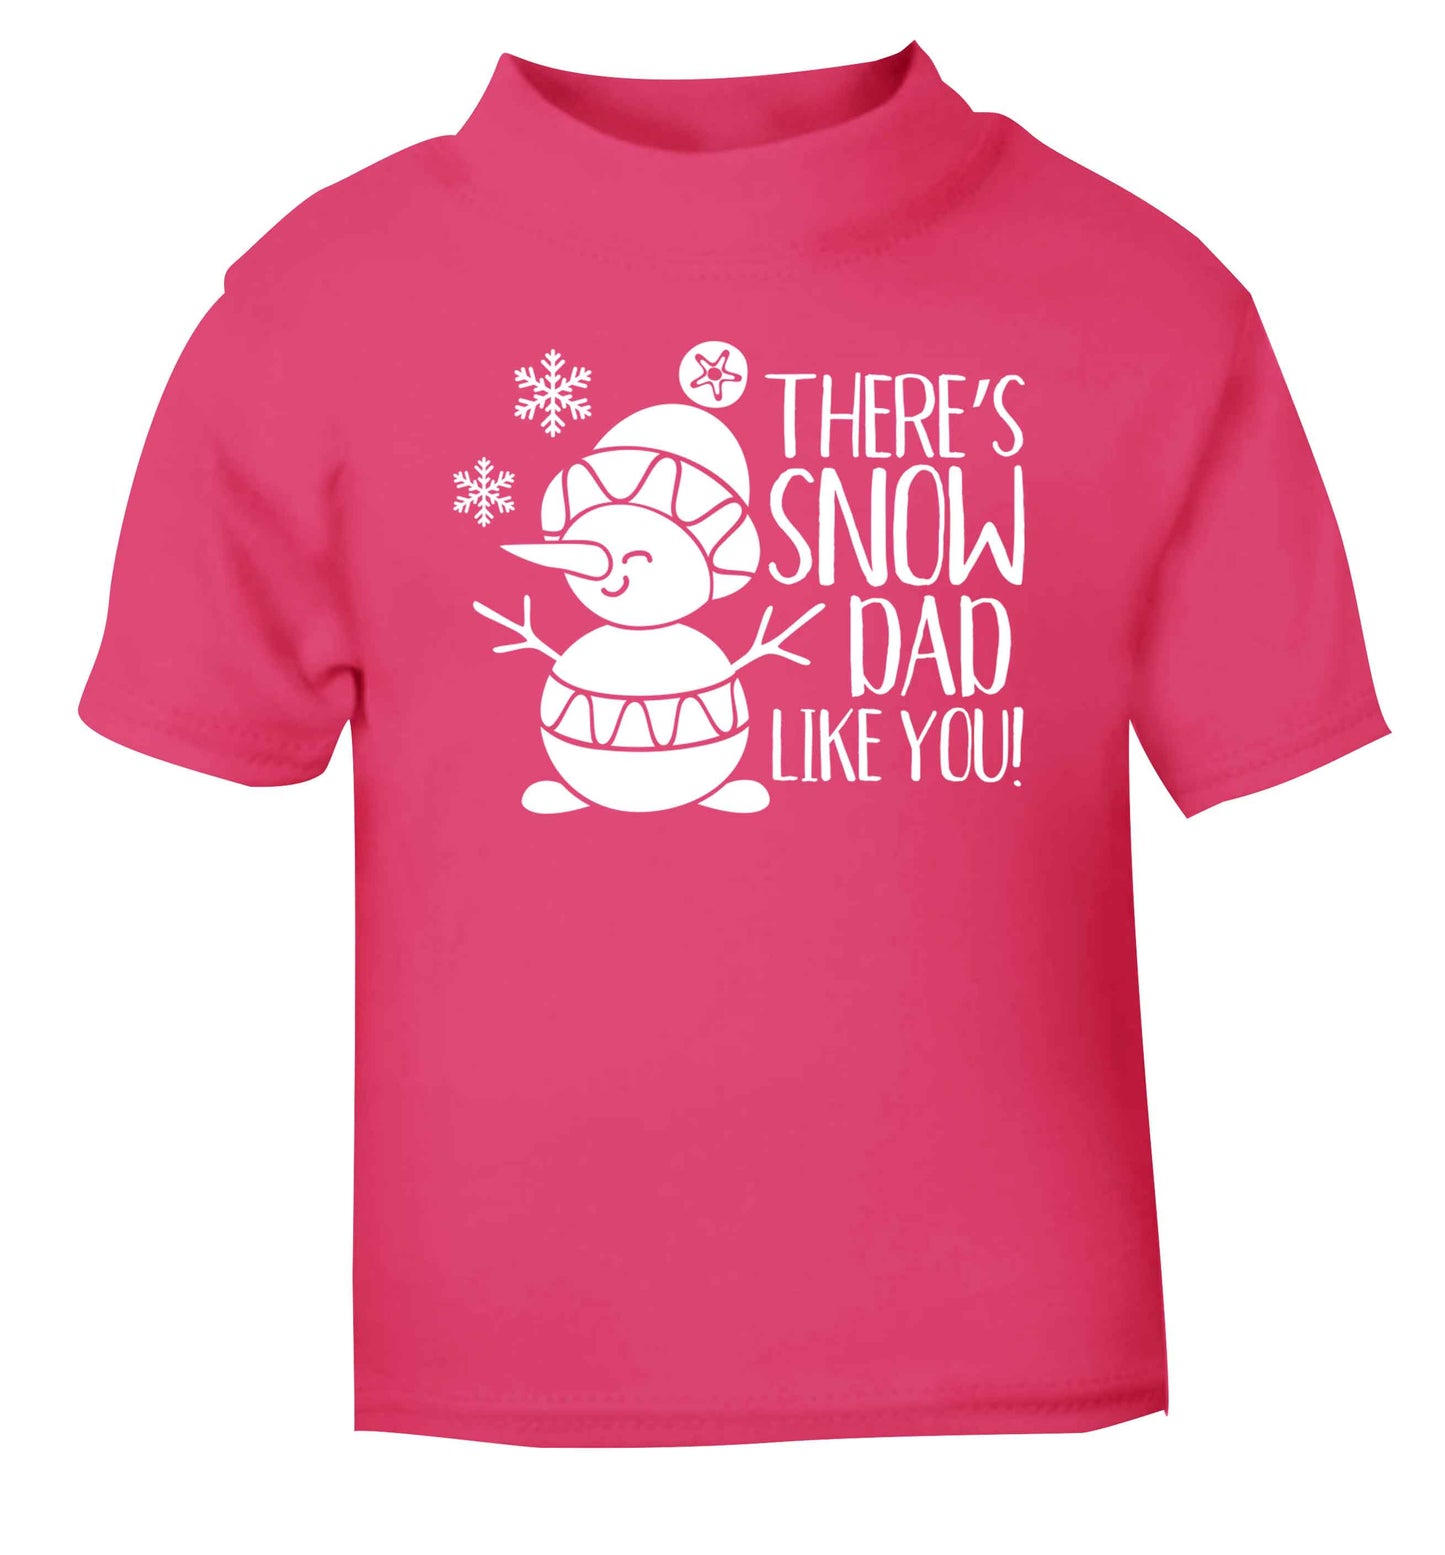 There's snow dad like you pink baby toddler Tshirt 2 Years